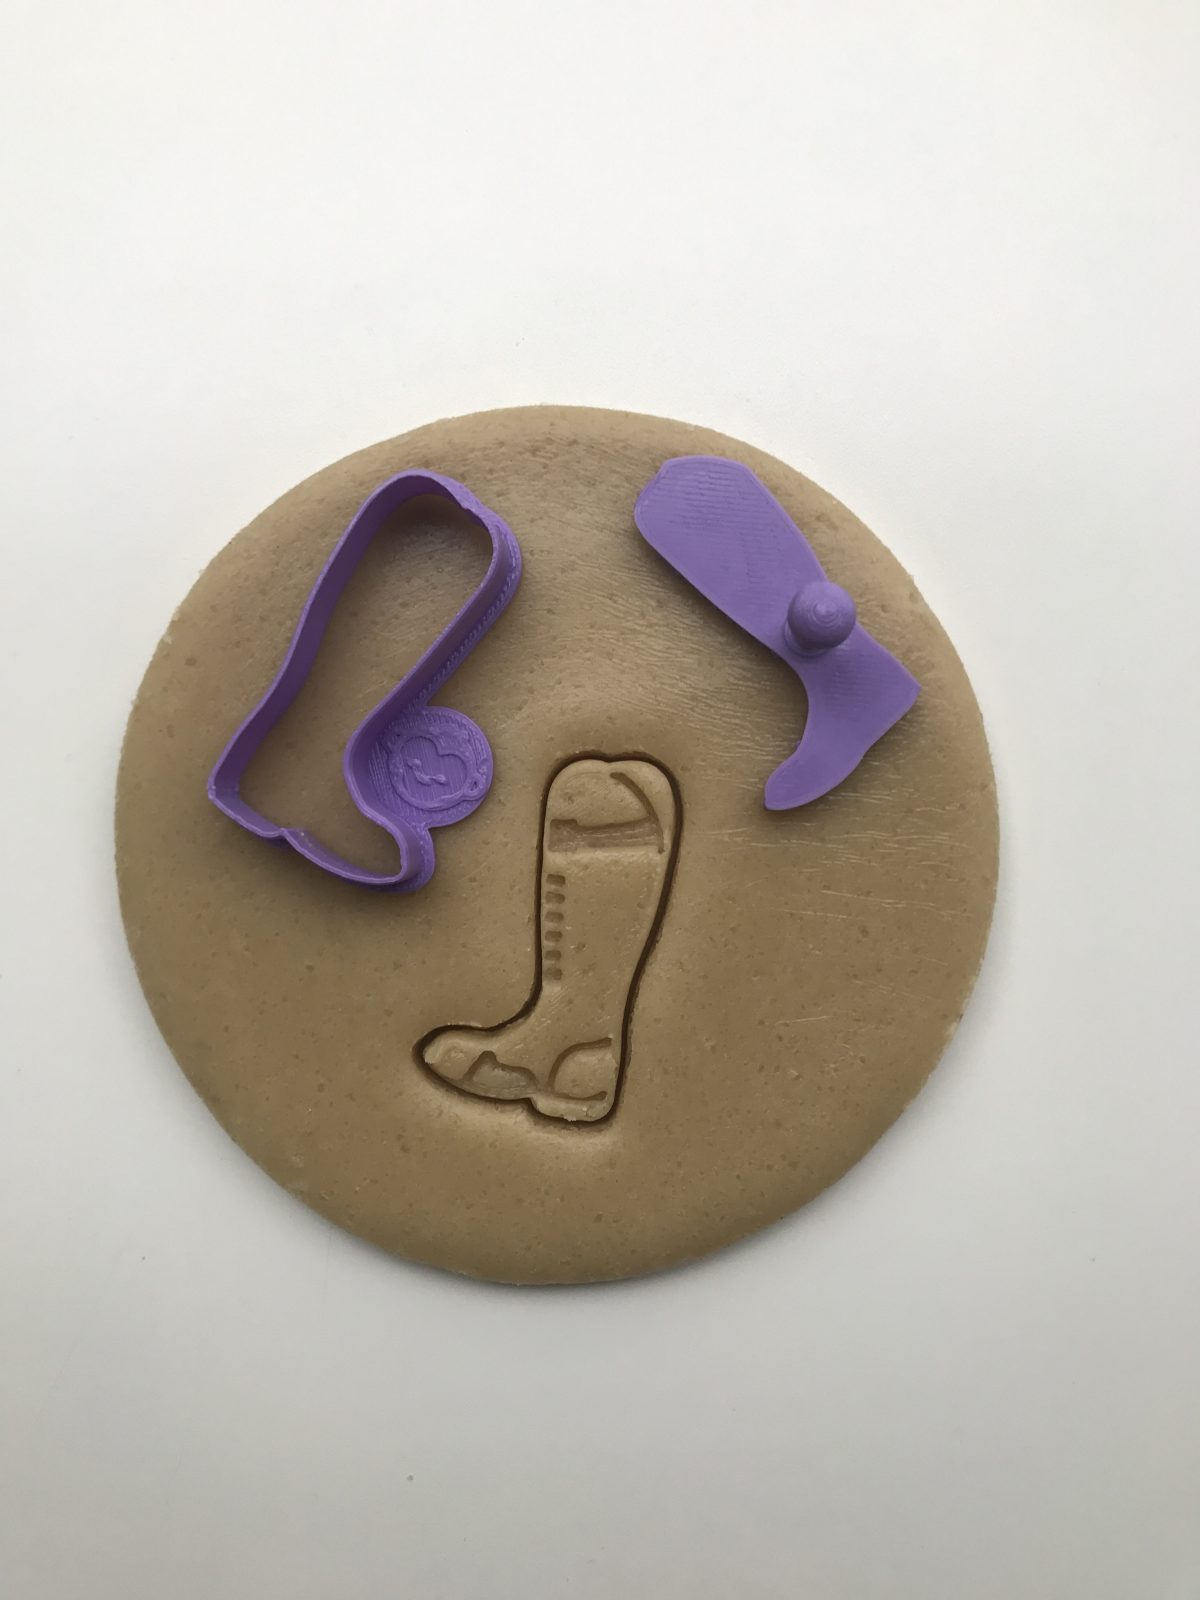 Riding Boot Mini Cookie Cutter